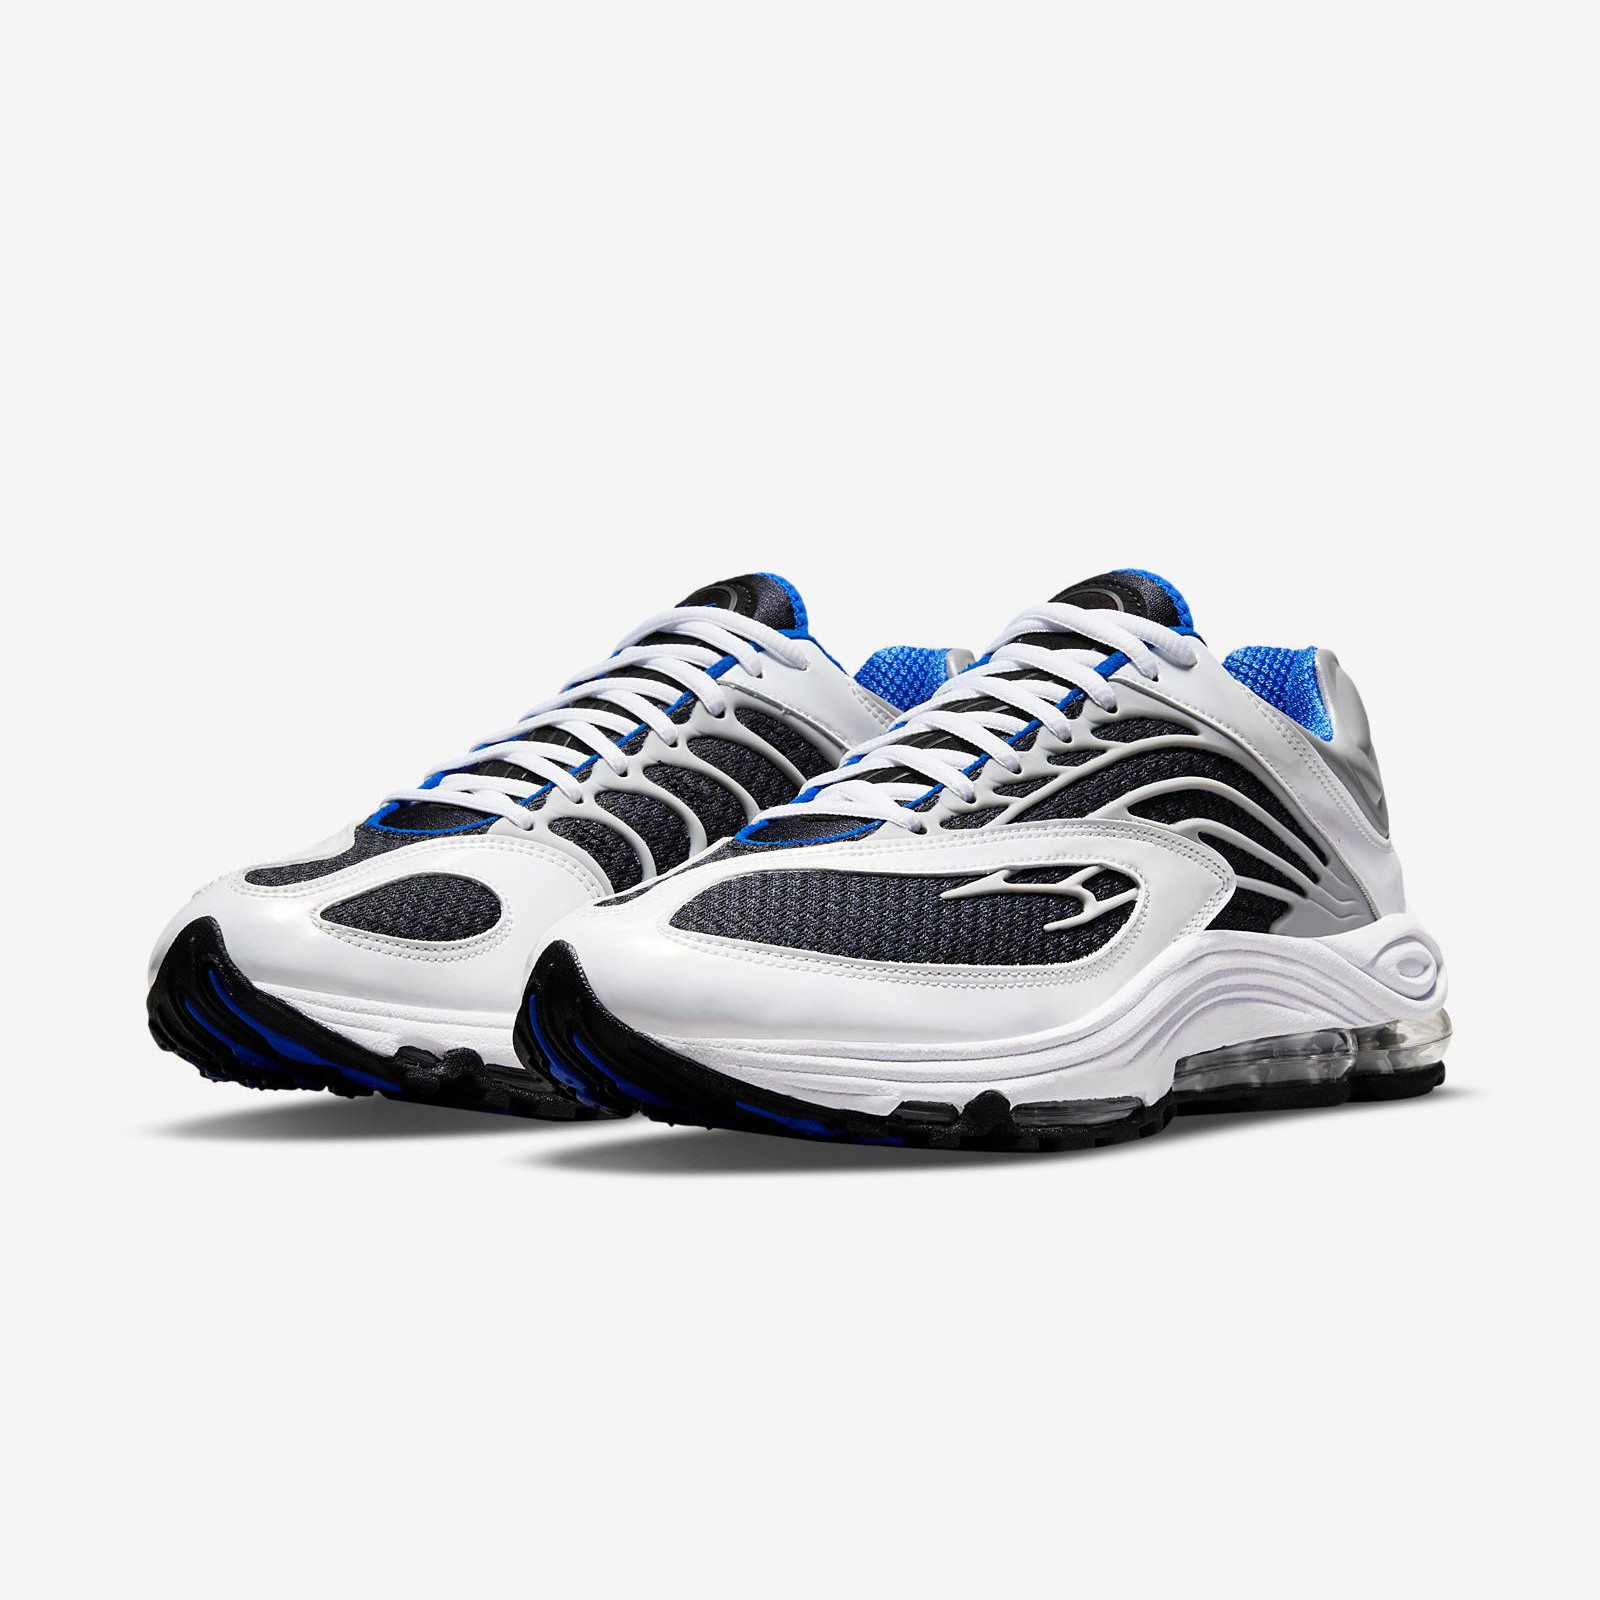 Nike Air Tuned Max
« Racer Blue »